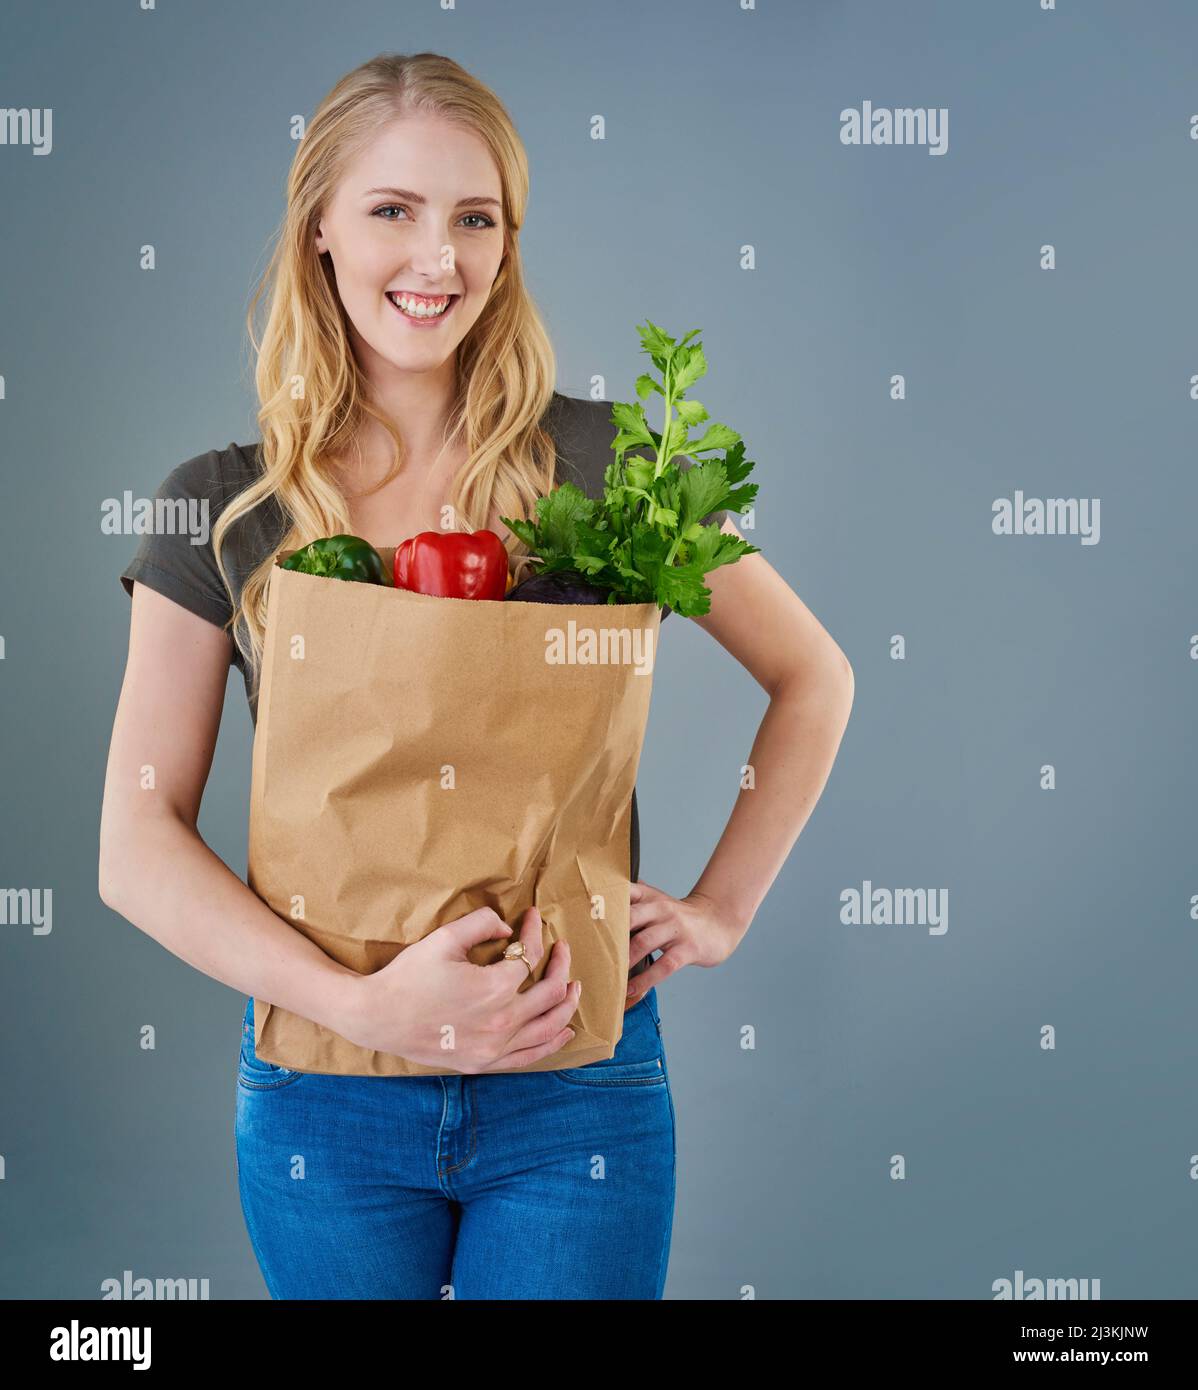 Eating healthy and looking great. Cropped studio shot of a young woman holding a paper bag full of vegetables. Stock Photo